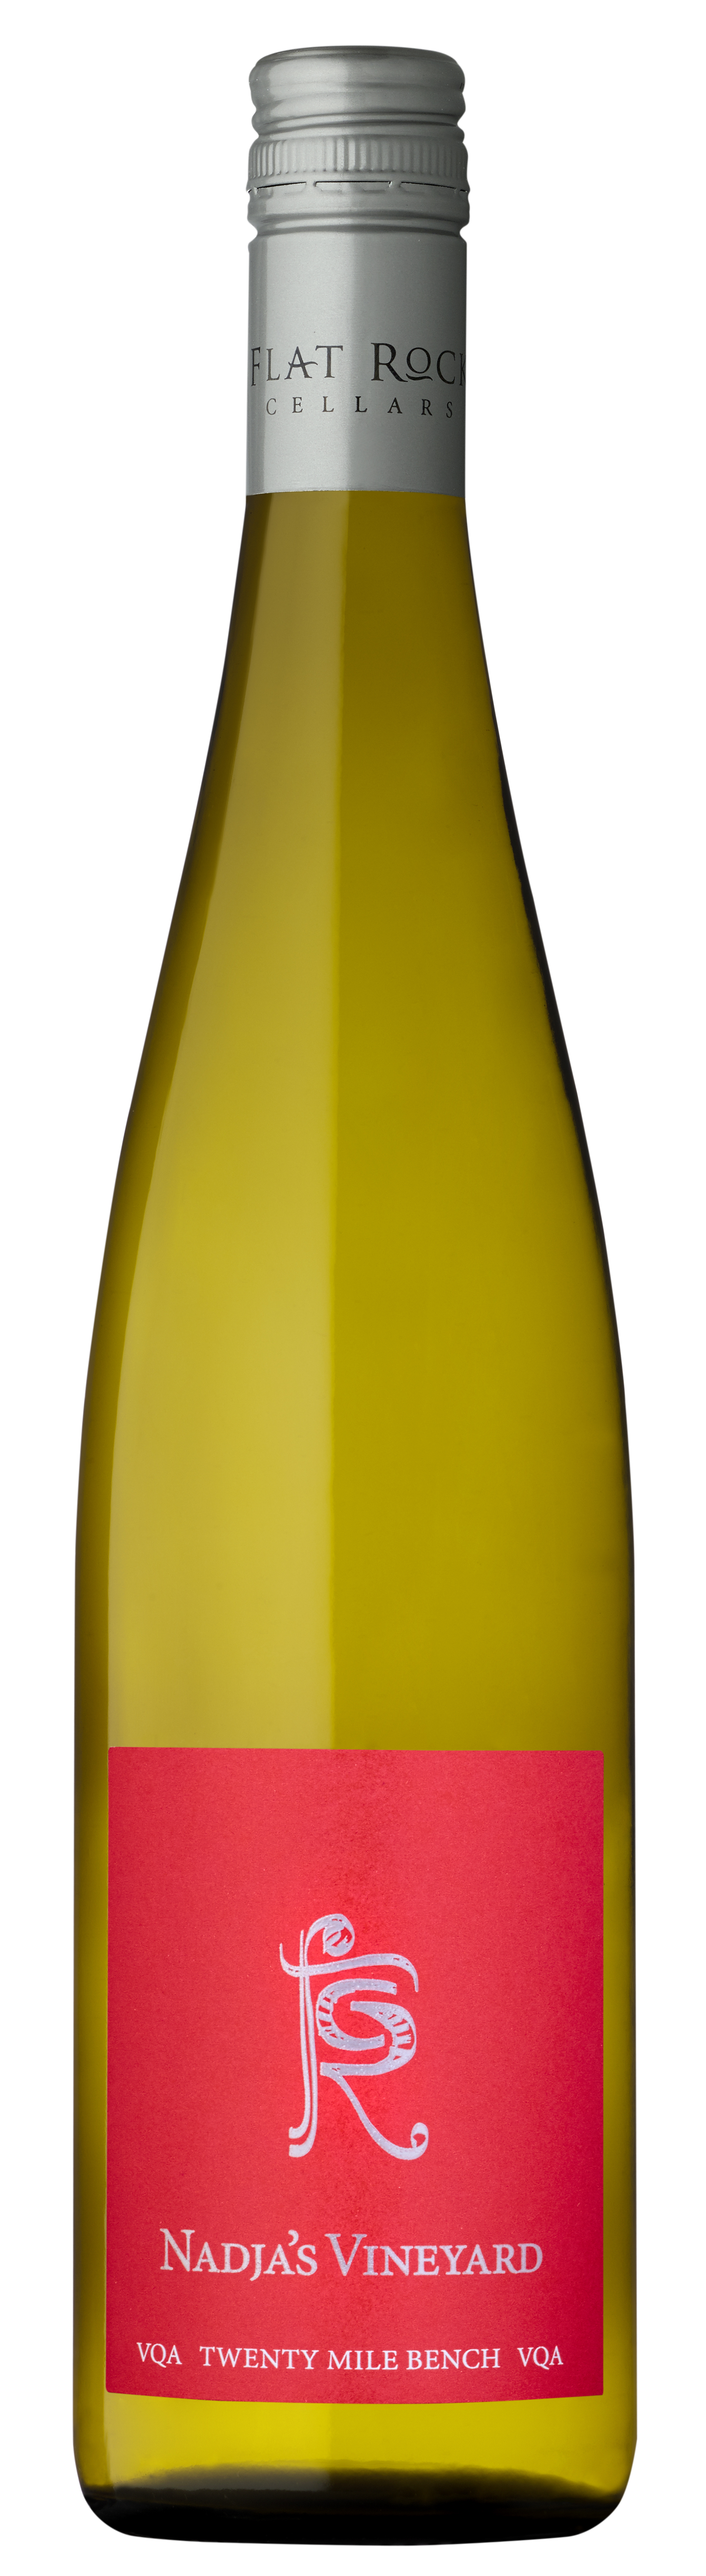 Product Image for SOLD OUT - 2019 Nadja's Vineyard Riesling